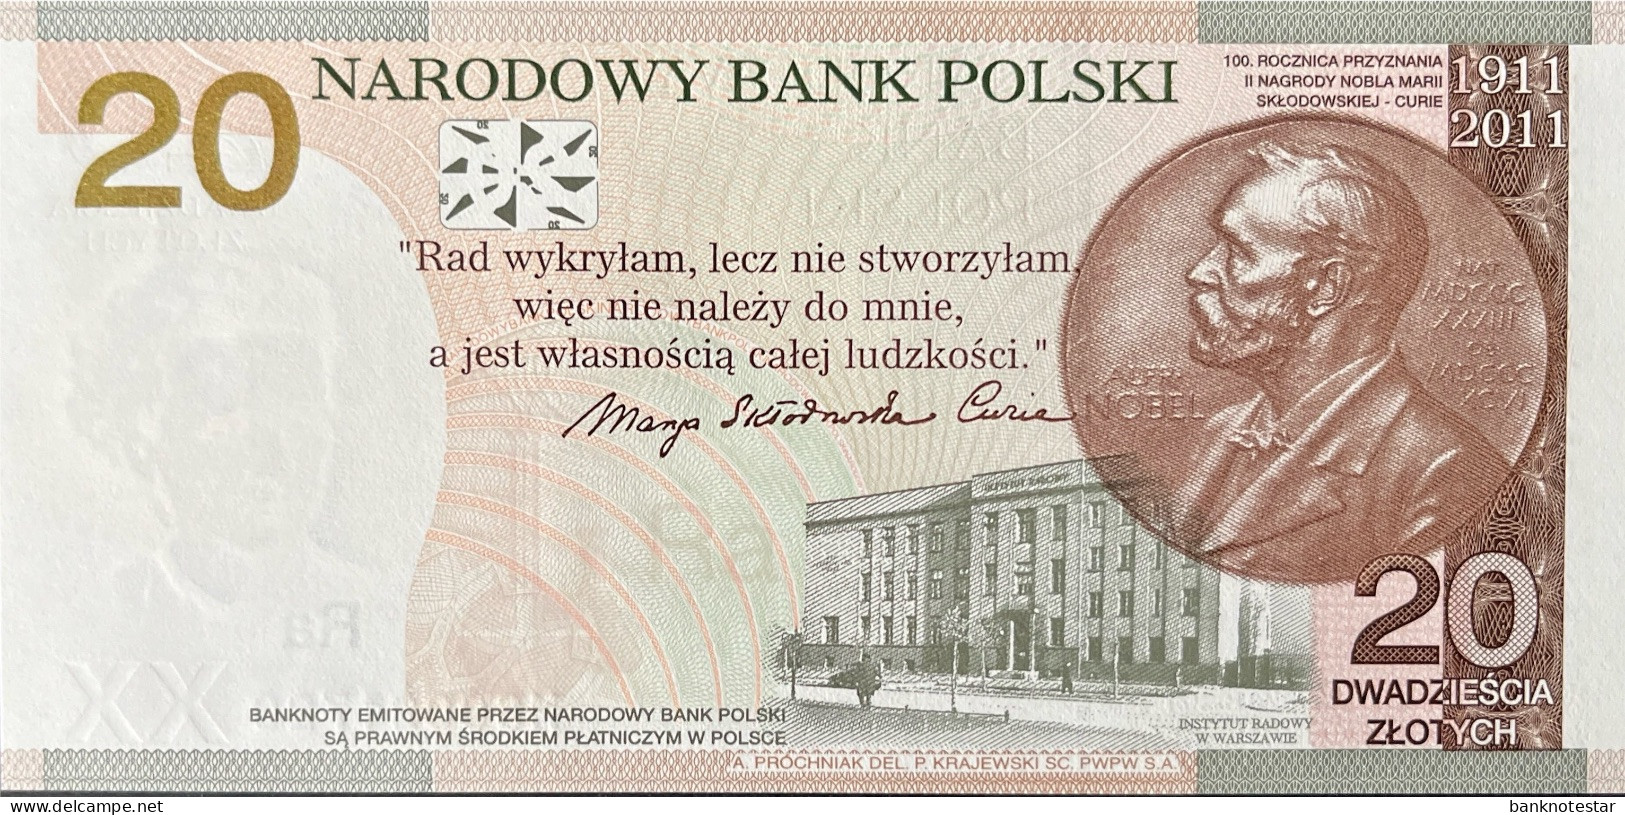 Poland 20 Zloty, P-A184 (20.4.2011) - UNC - Marie Curie Banknote - Polen